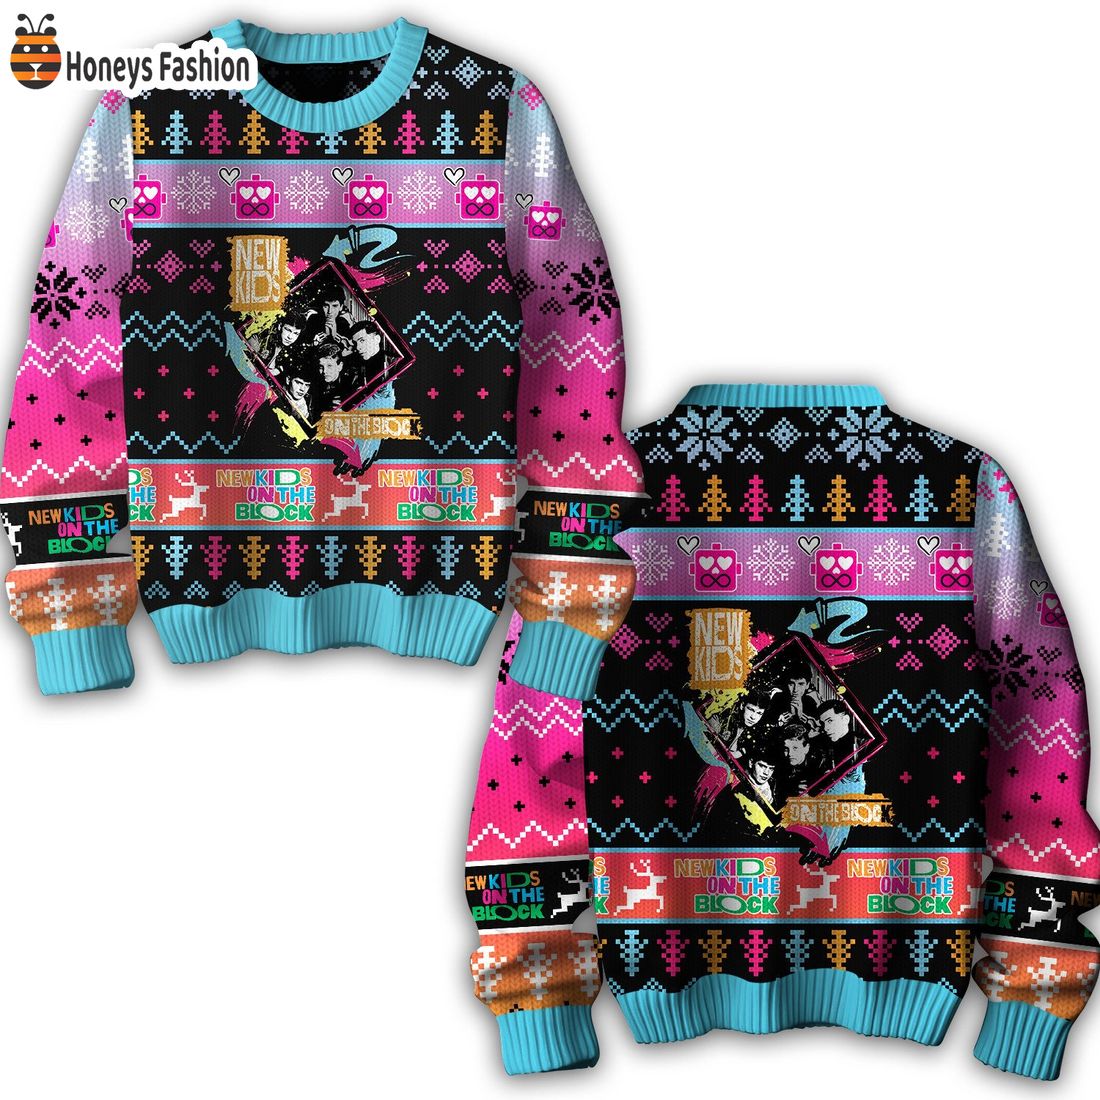 New Kids on the Block Band Ugly Sweater